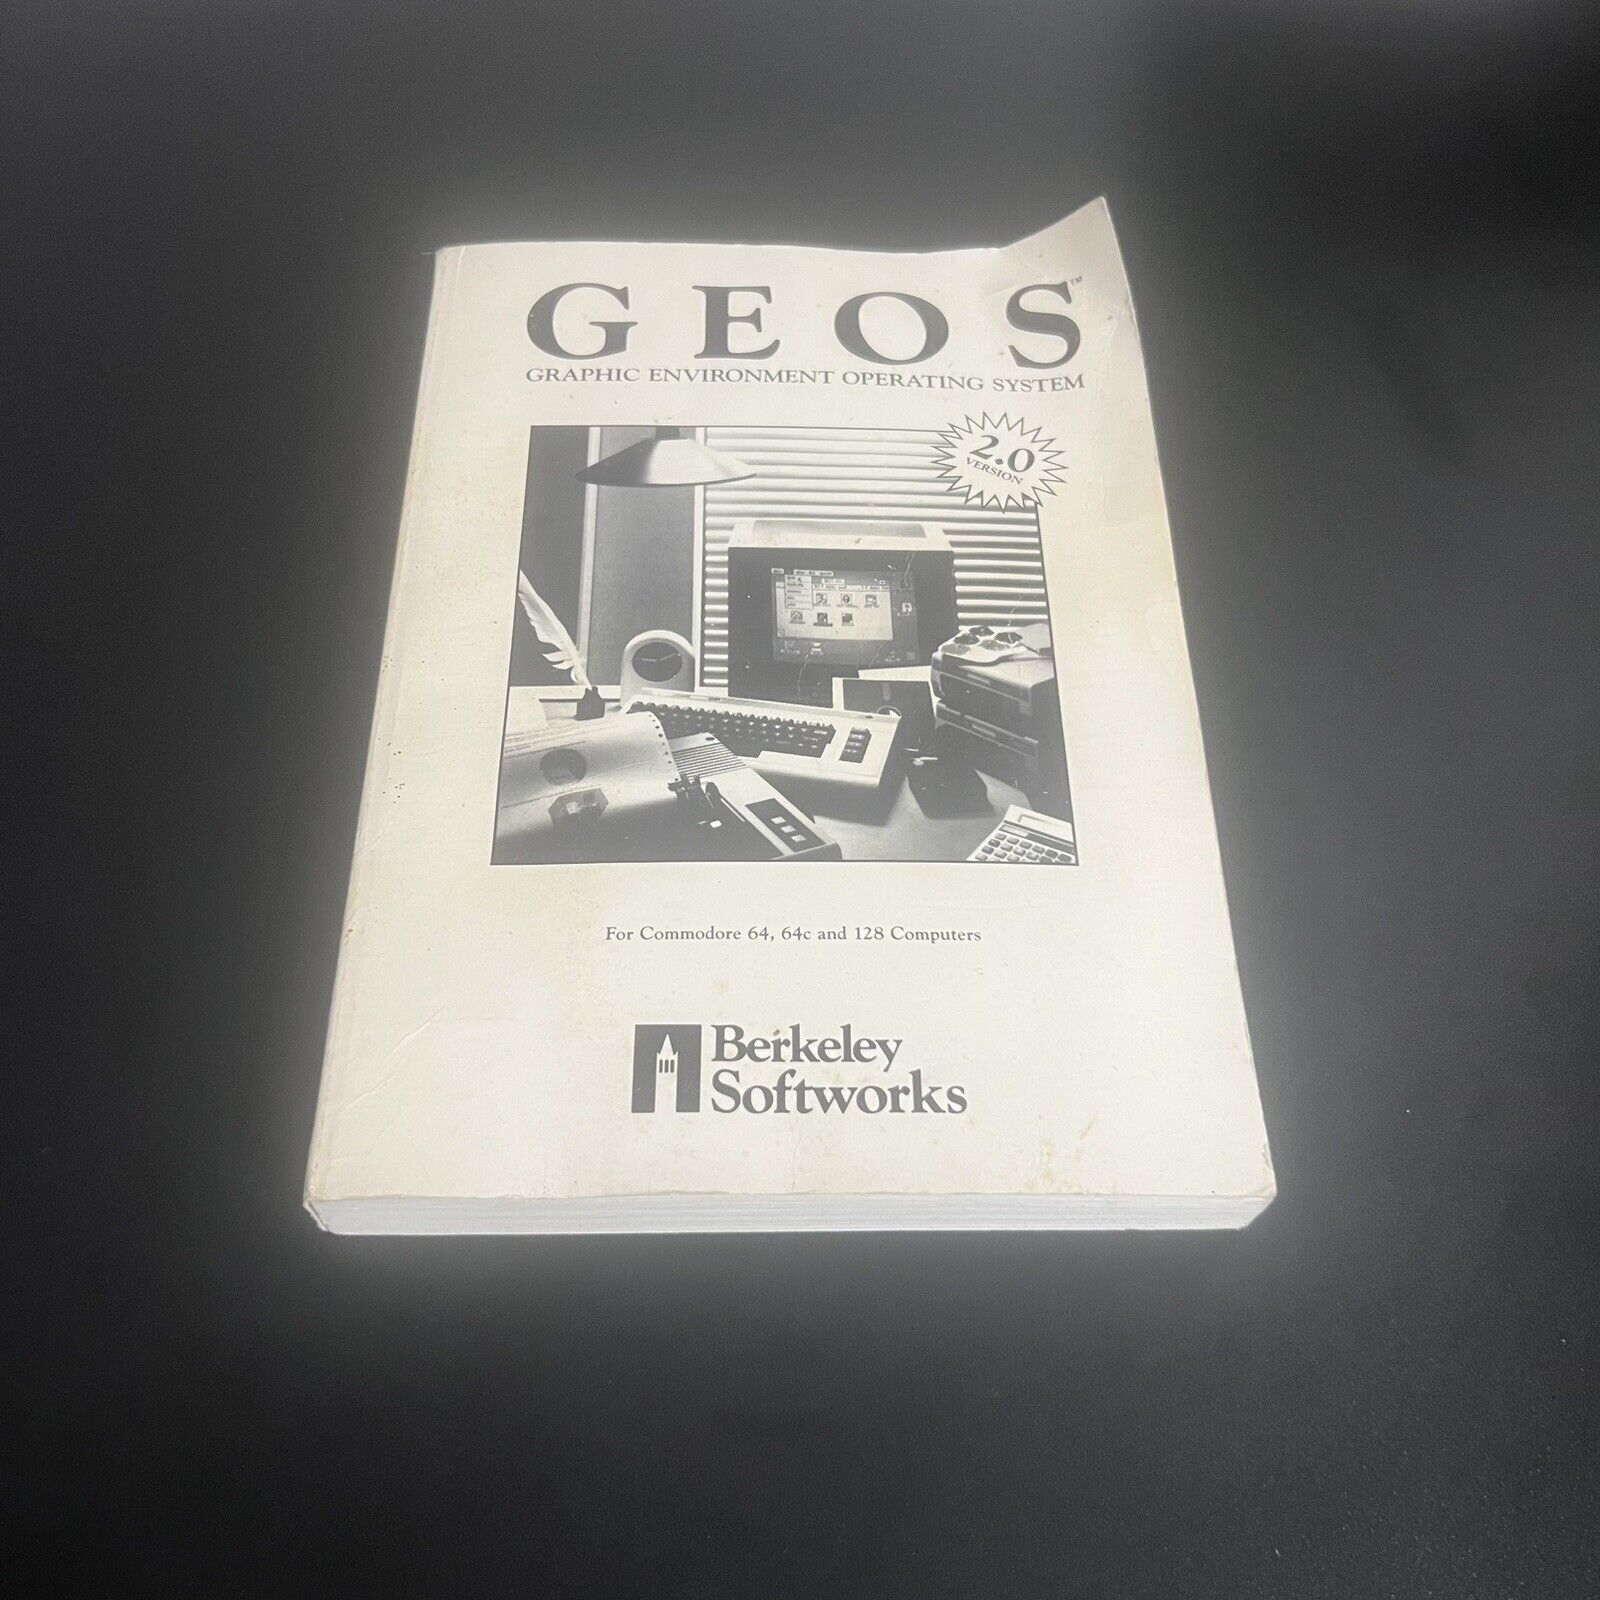 GEOS 2.0 Graphic Environment Operating System Manual